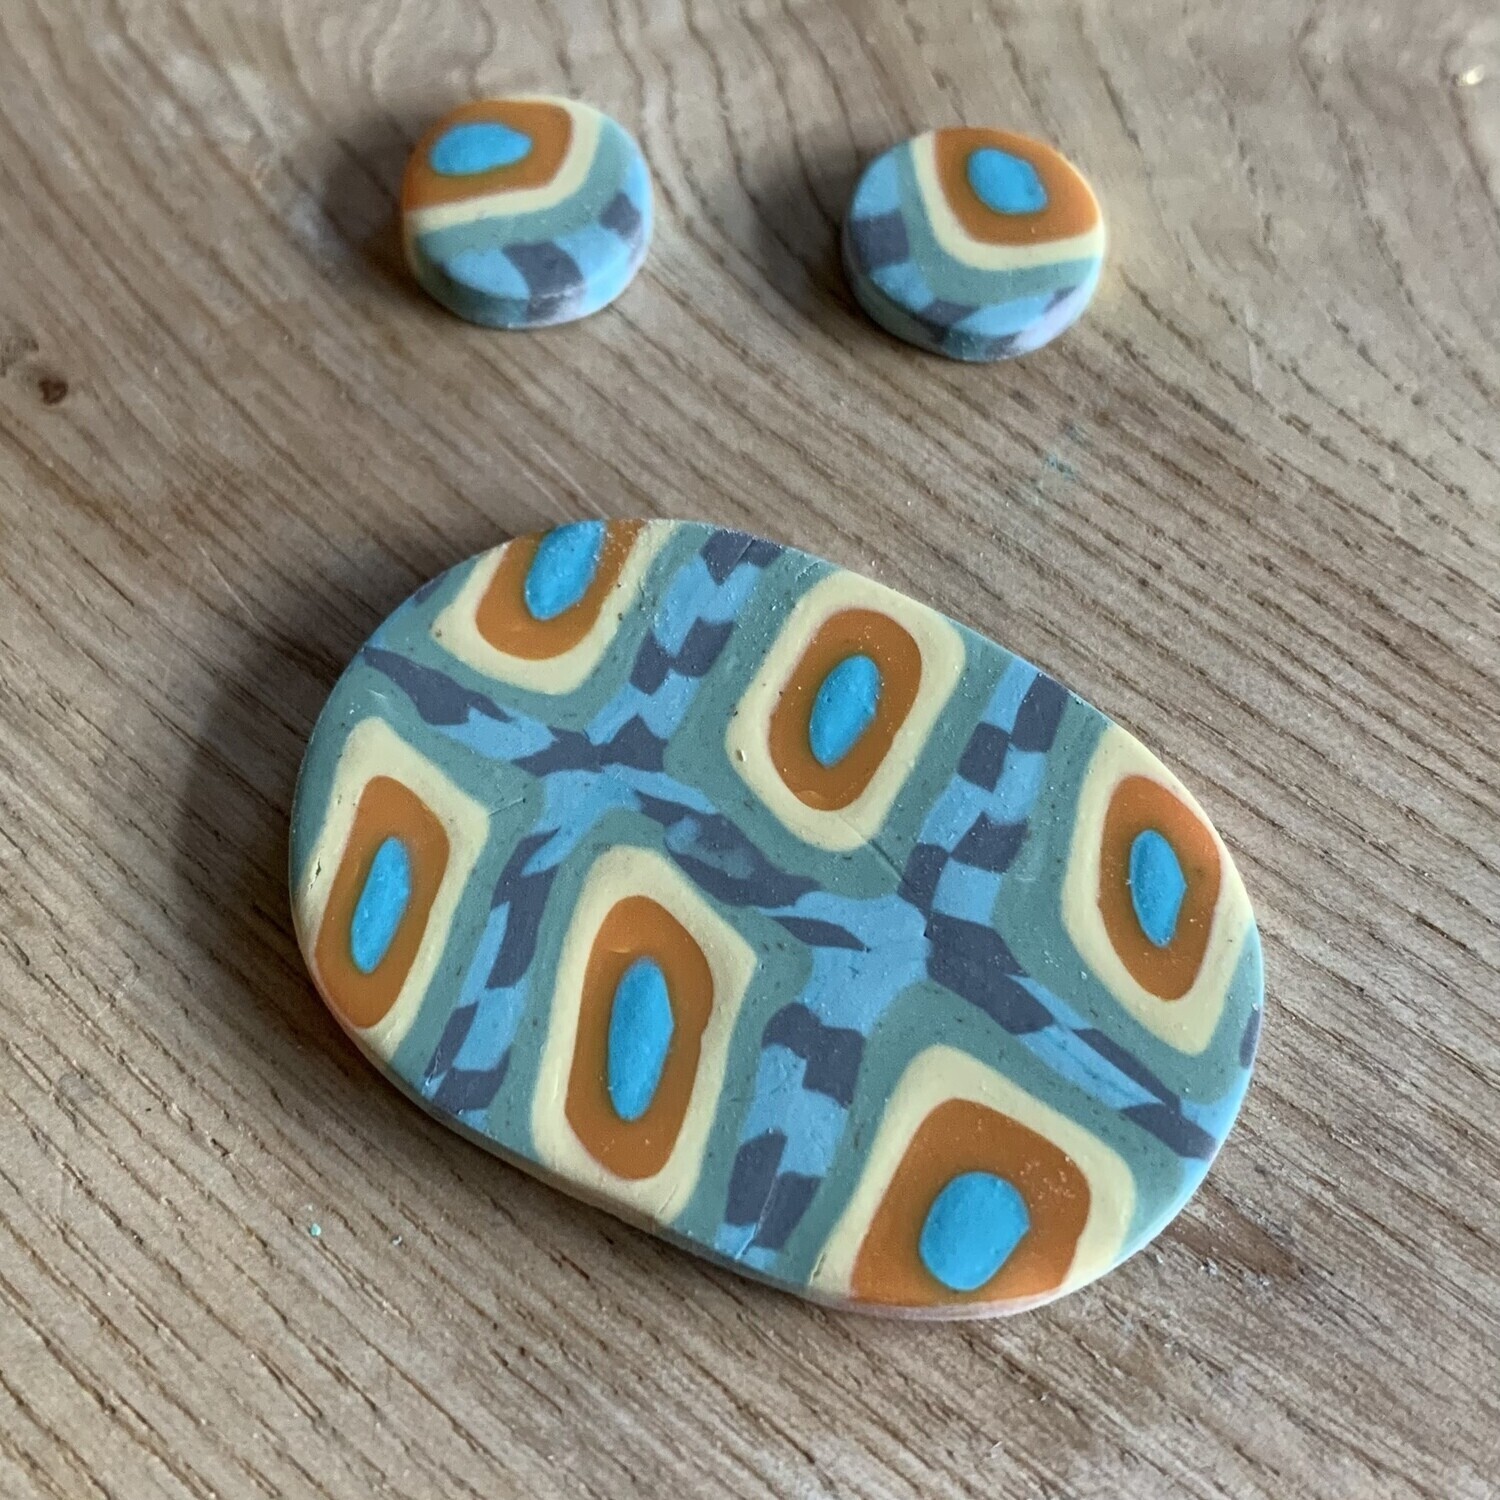 Polymer Clay Jewellery from Home - 1 Day - One to One